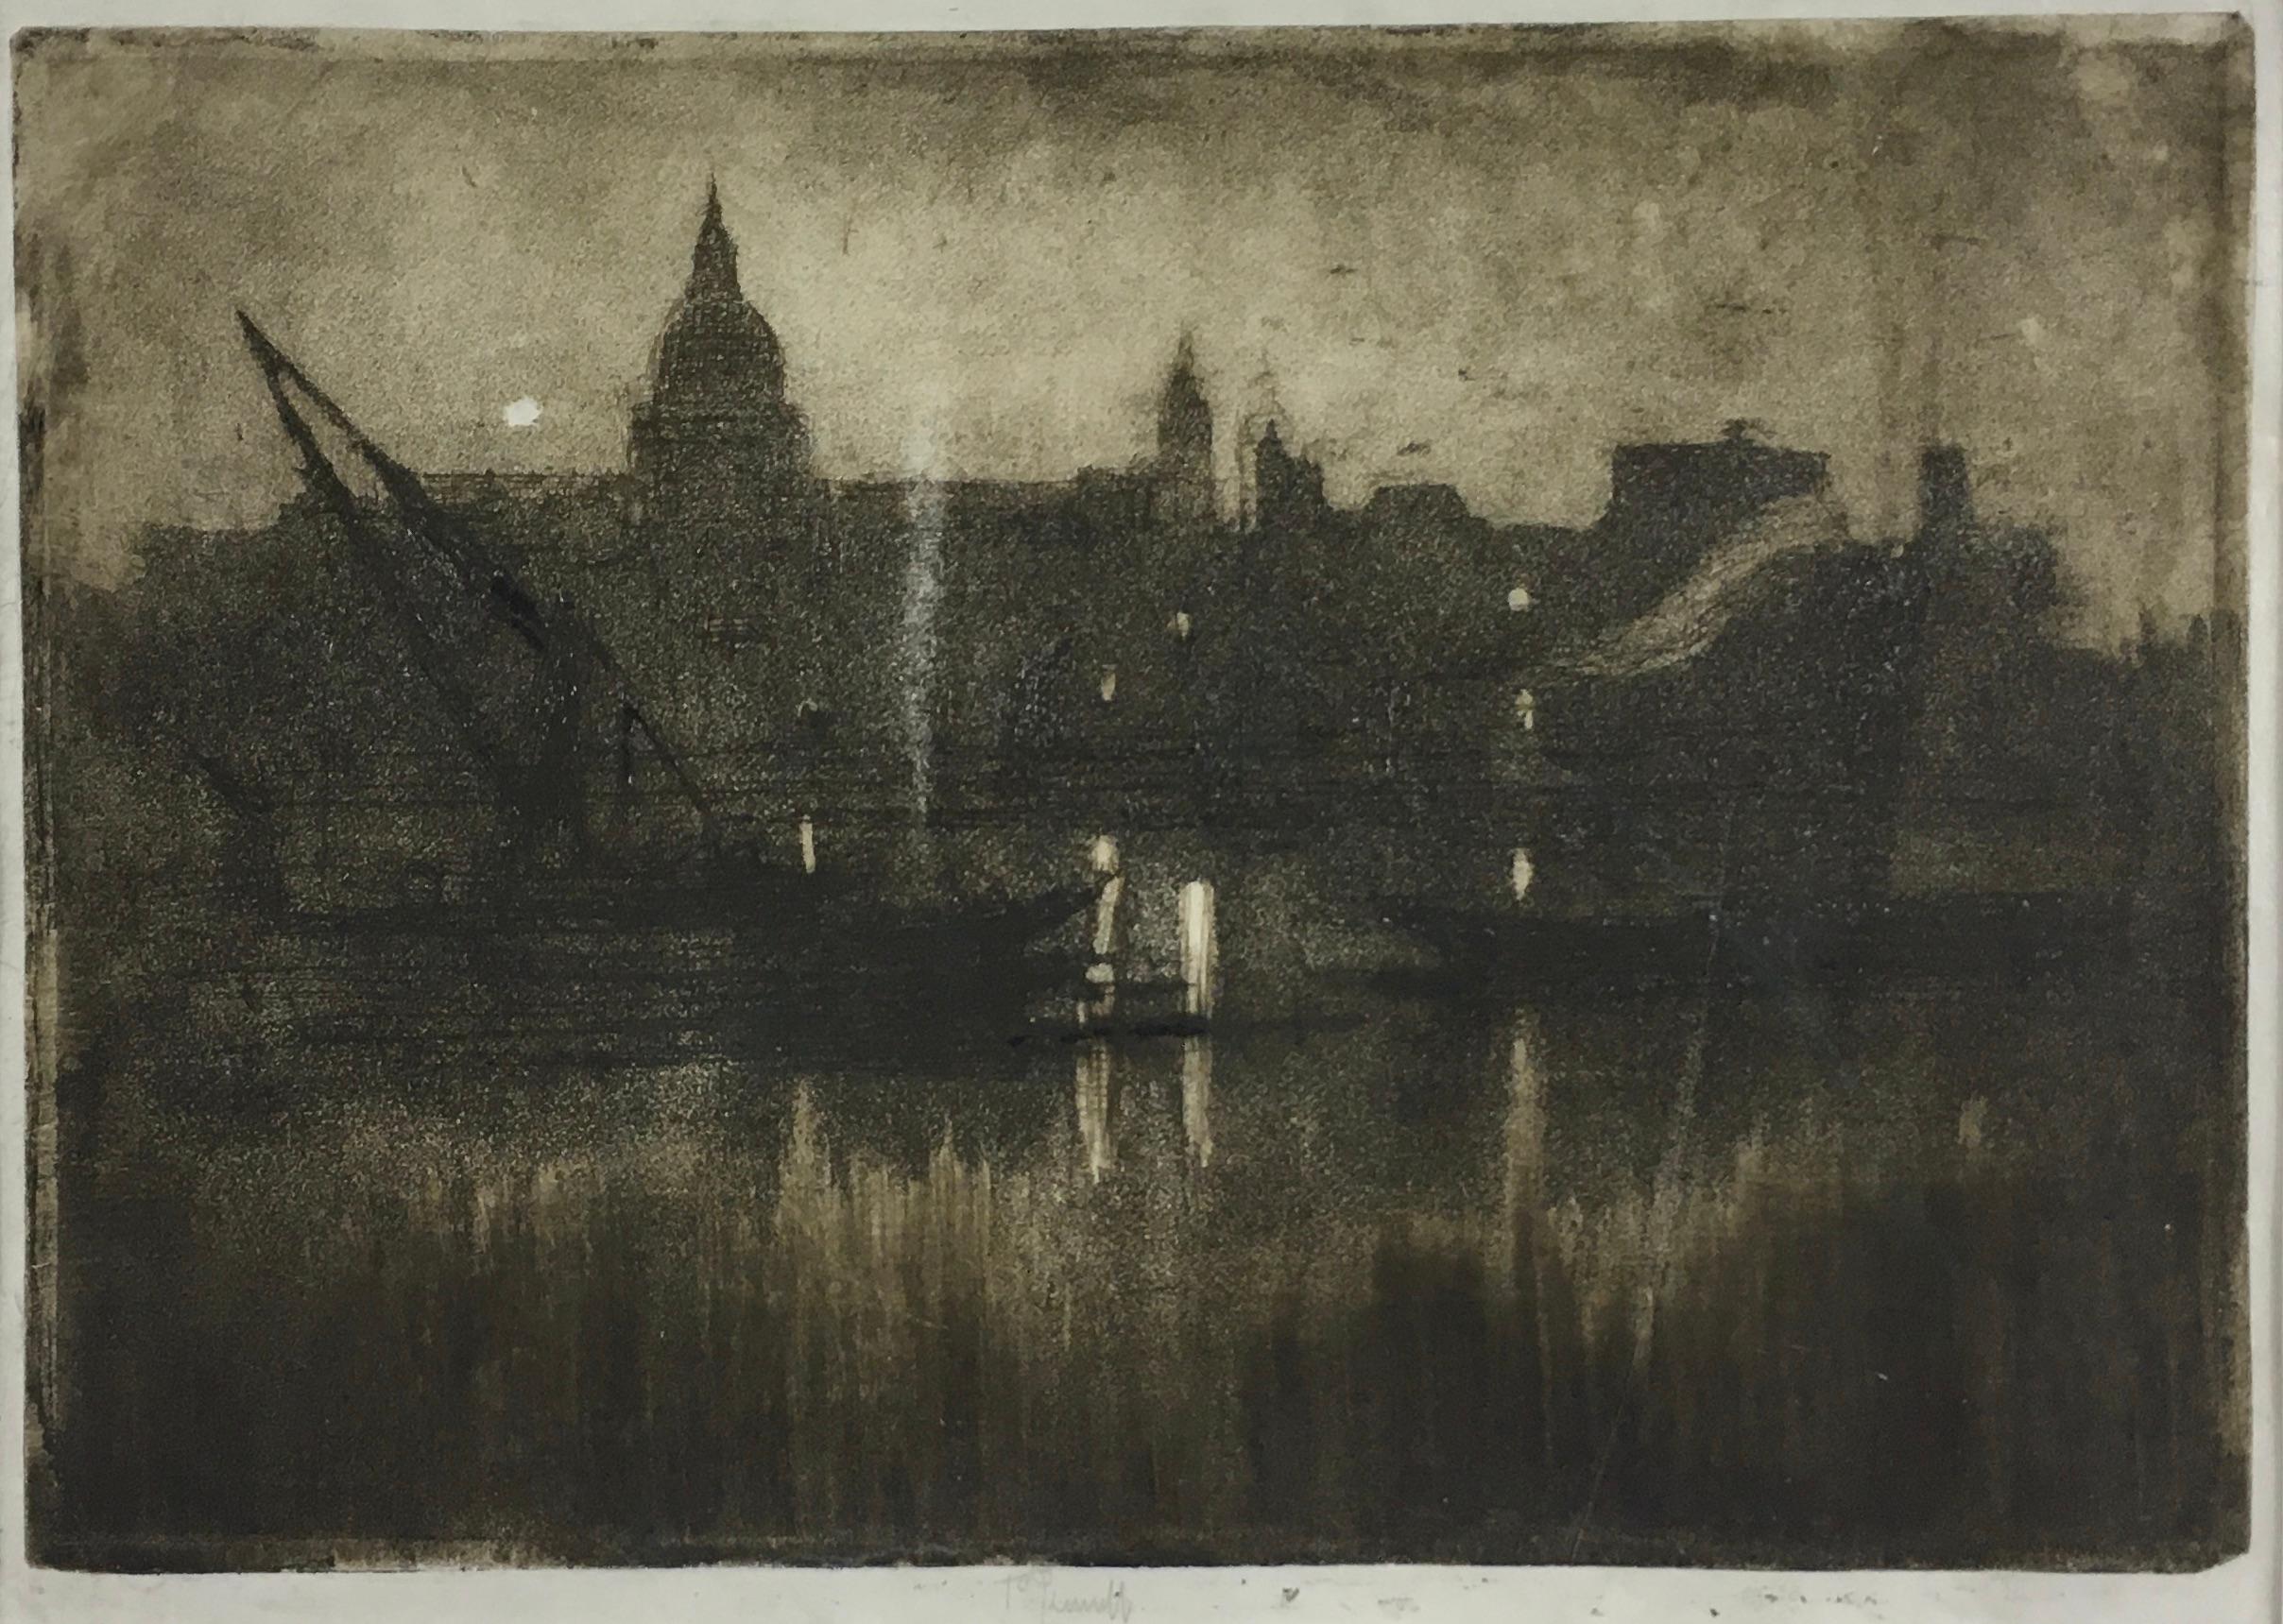 JOSEPH PENNELL
(1857-1926)

St Paul’s from the River, 1894

Signed
Sandpaper aquatint

Plate size17.5 by 25 cm., 7 by 10 in.
(frame size 38.5 by 45 cm., 15 ¼ by 17 ¾ in.)

Pennell was born in Philadelphia where he studied at School of Industrial Art